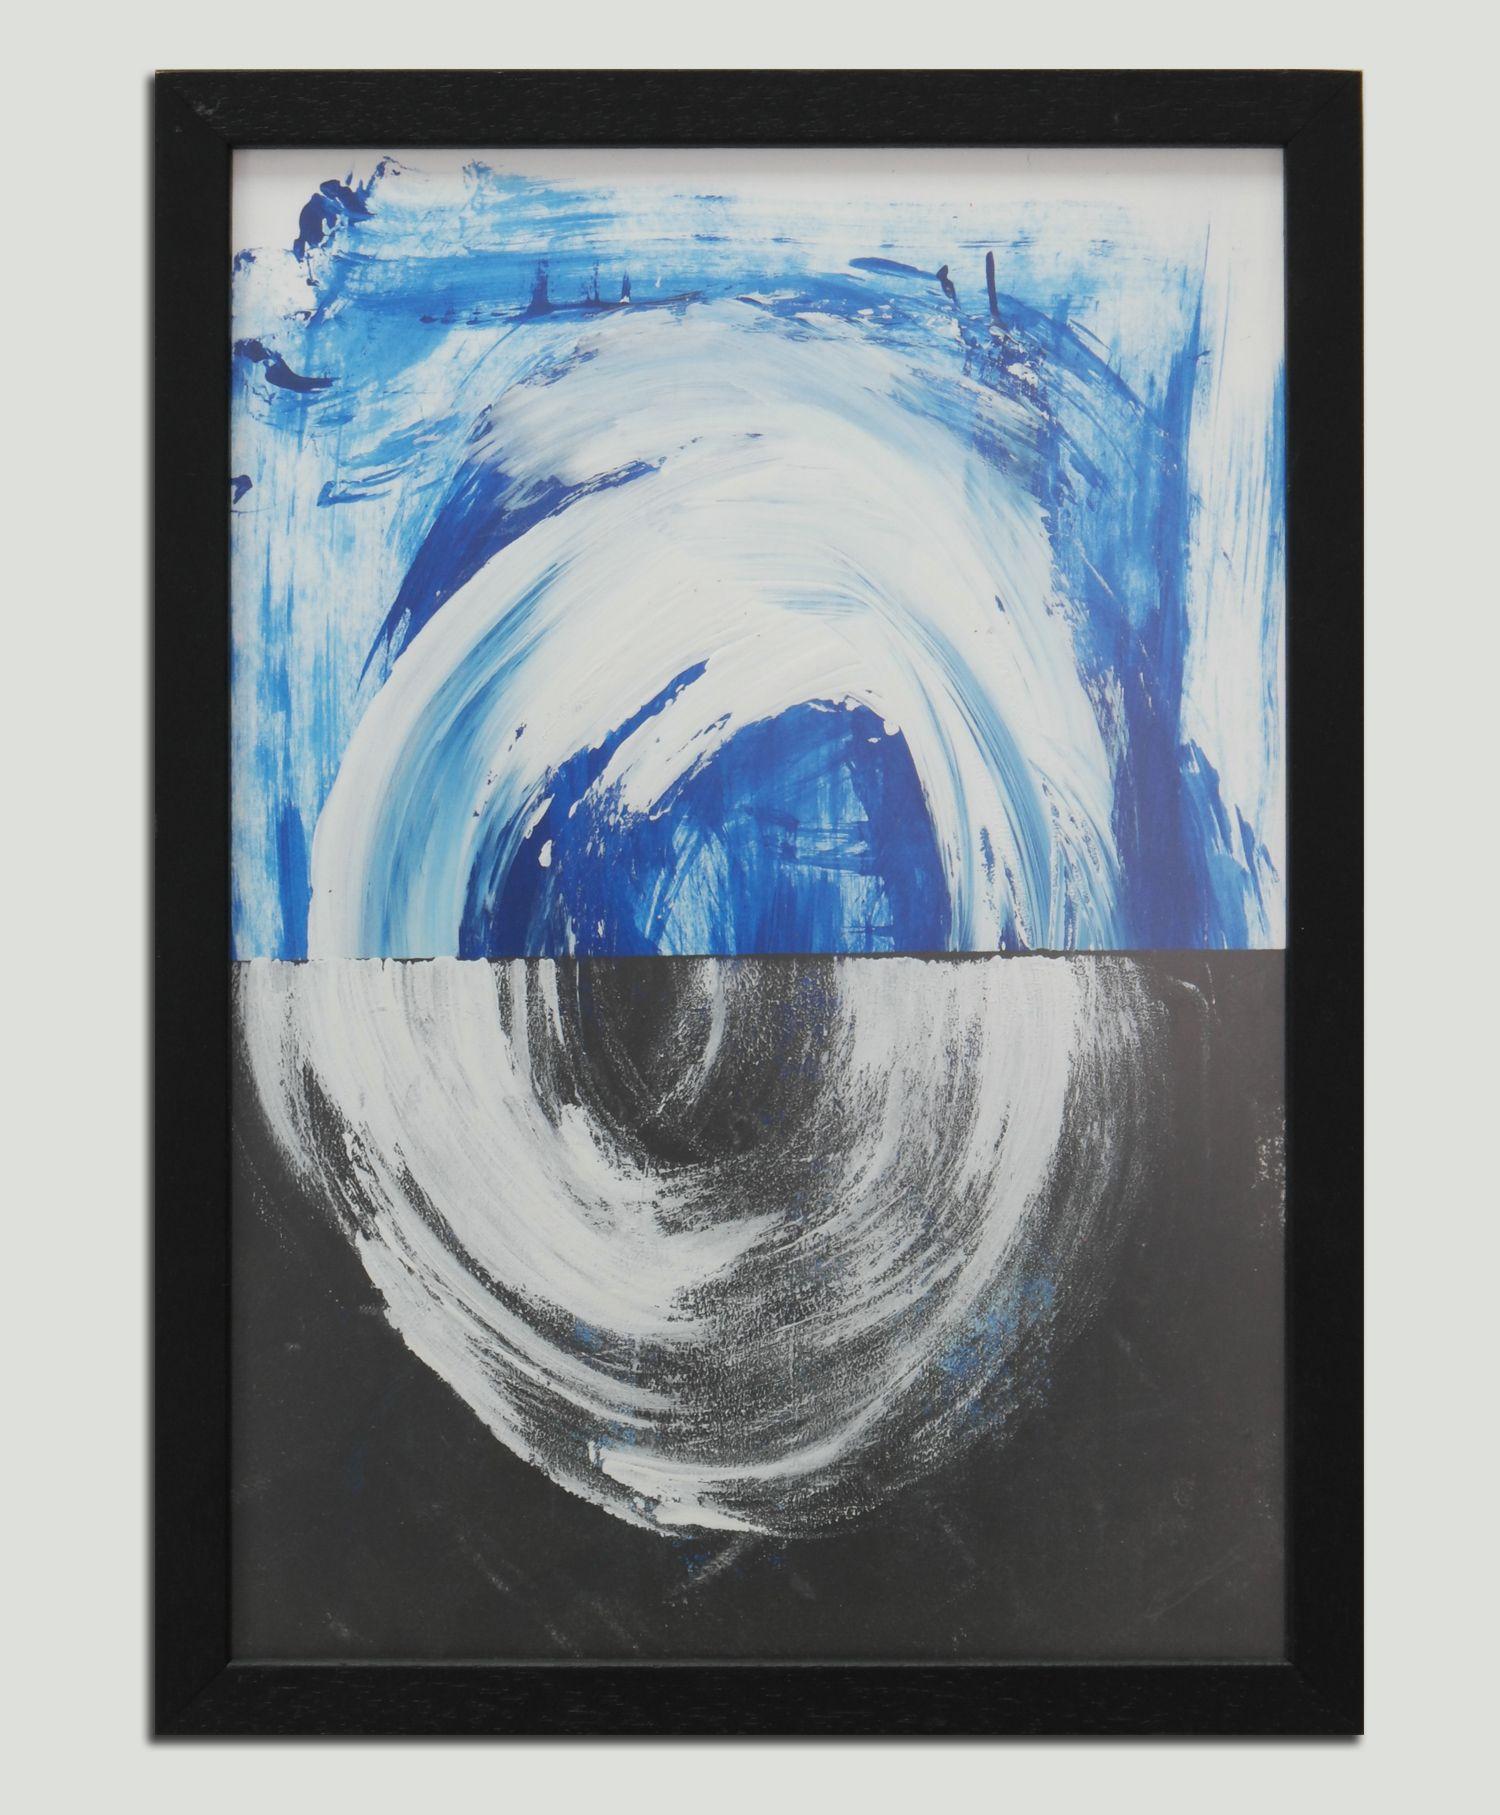 Acrylic Abstract Painting, Original artwork created by Ronald Hunter.  Two in one; this pair of paintings on paper complement each other, or can be used as two separate pieces, to accommodate your personal style or decor - Including wood frame.   